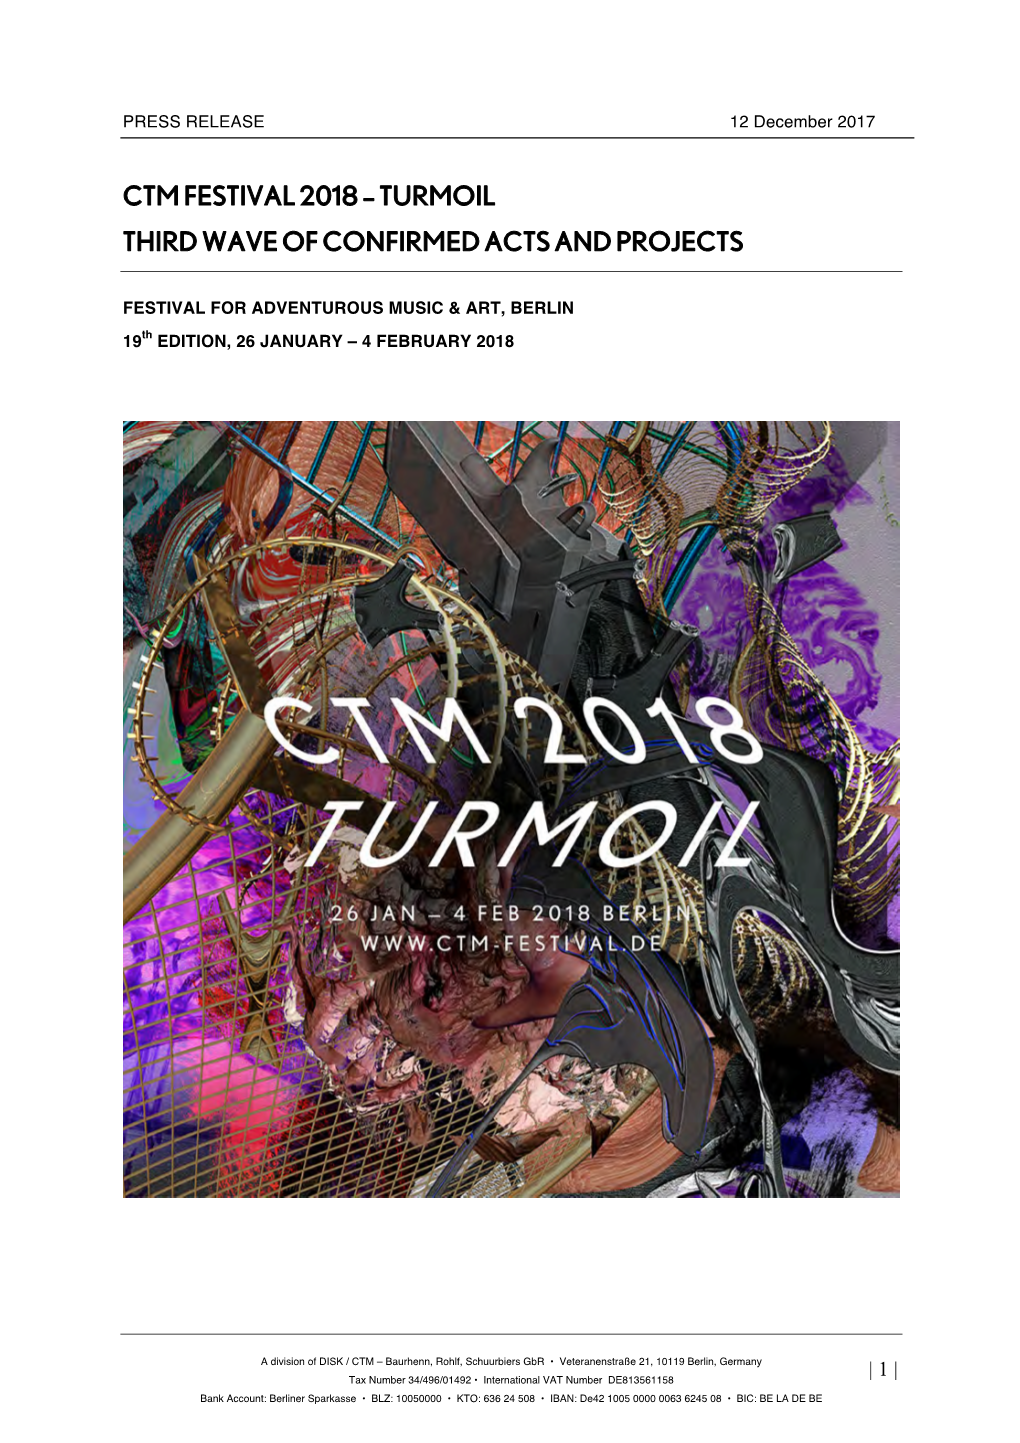 Turmoil Third Wave of Confirmed Acts and Projects